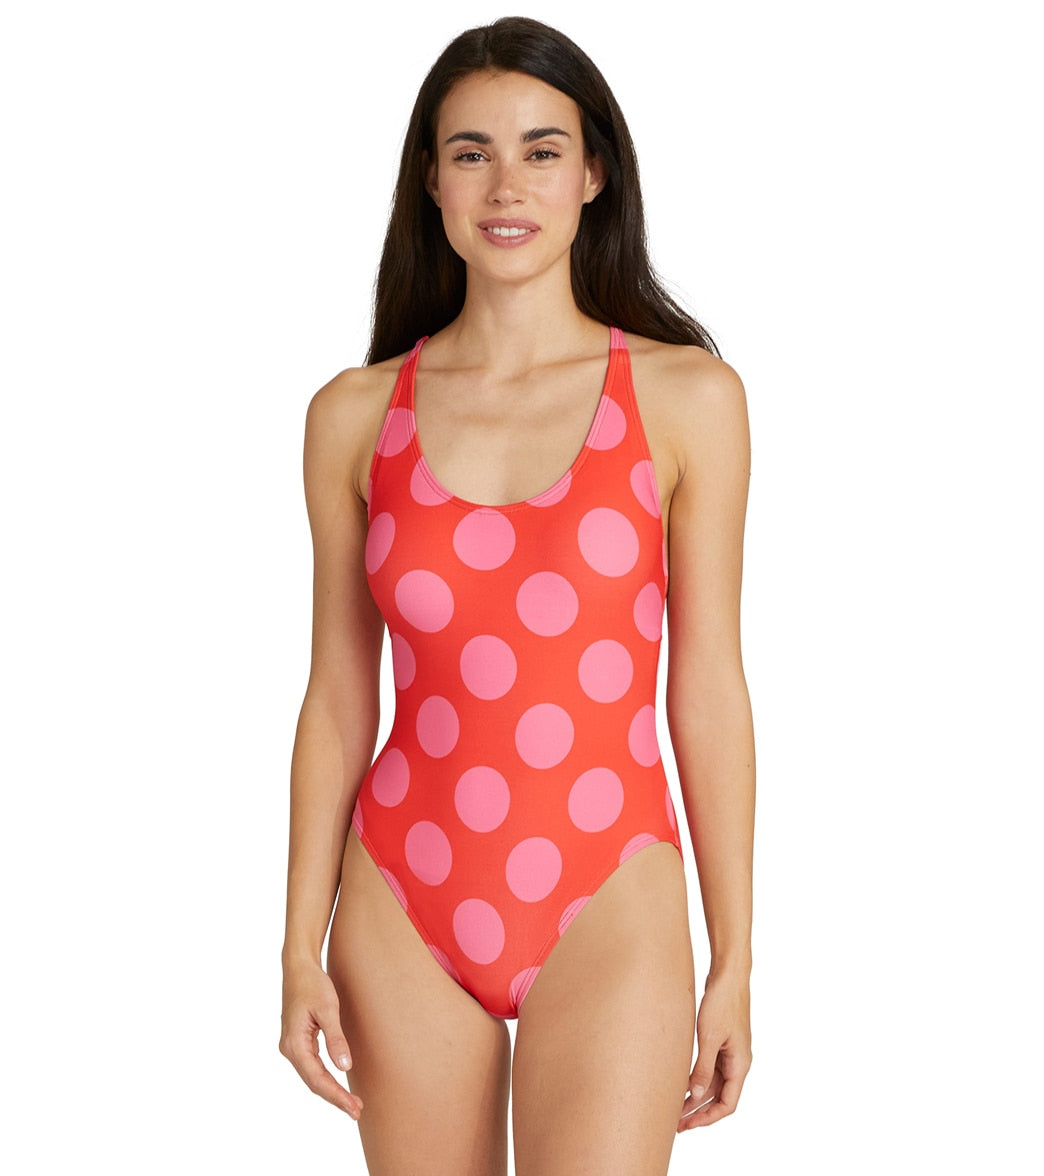 Kate Spade New York Womens Large Dots Lace Back One Piece Swimsuit